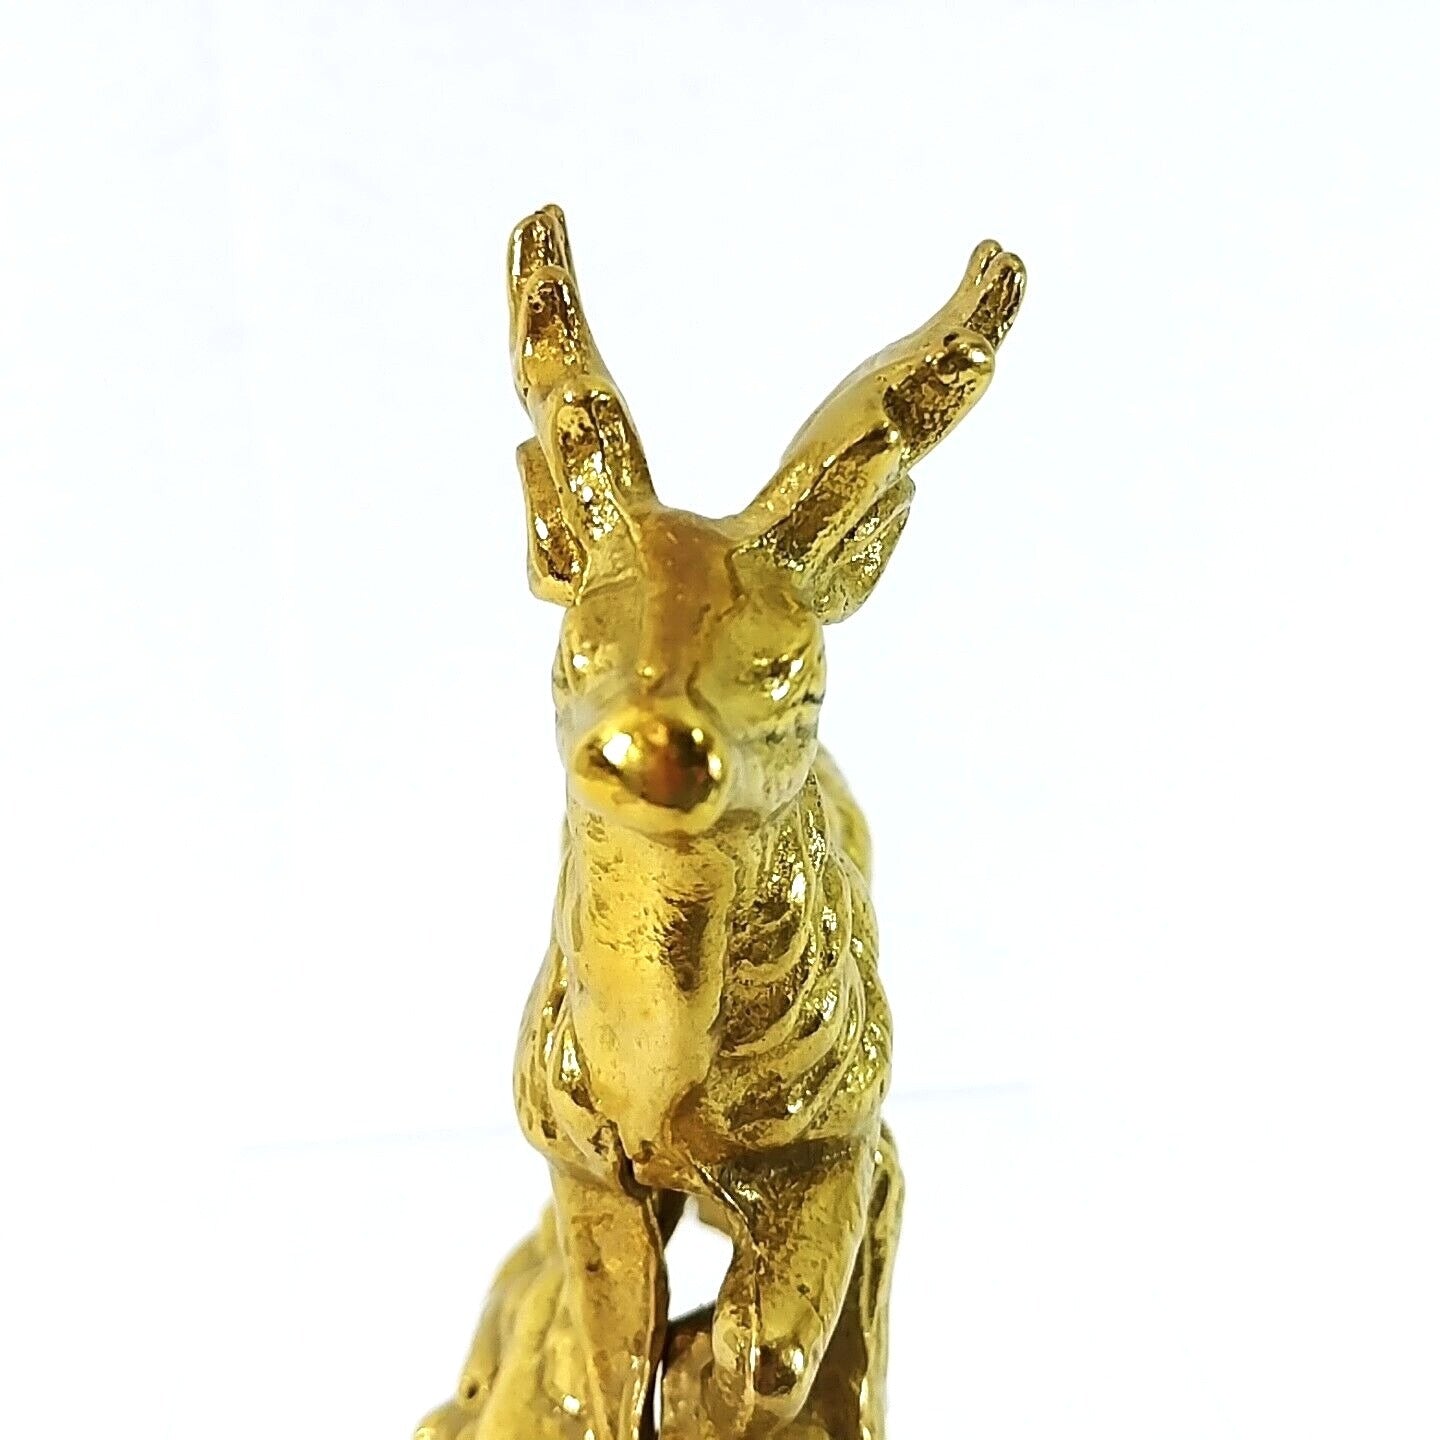 Brass Stag Deer Figurine Paperweight Office Desk Cabin Lodge Decor 4.5" Tall